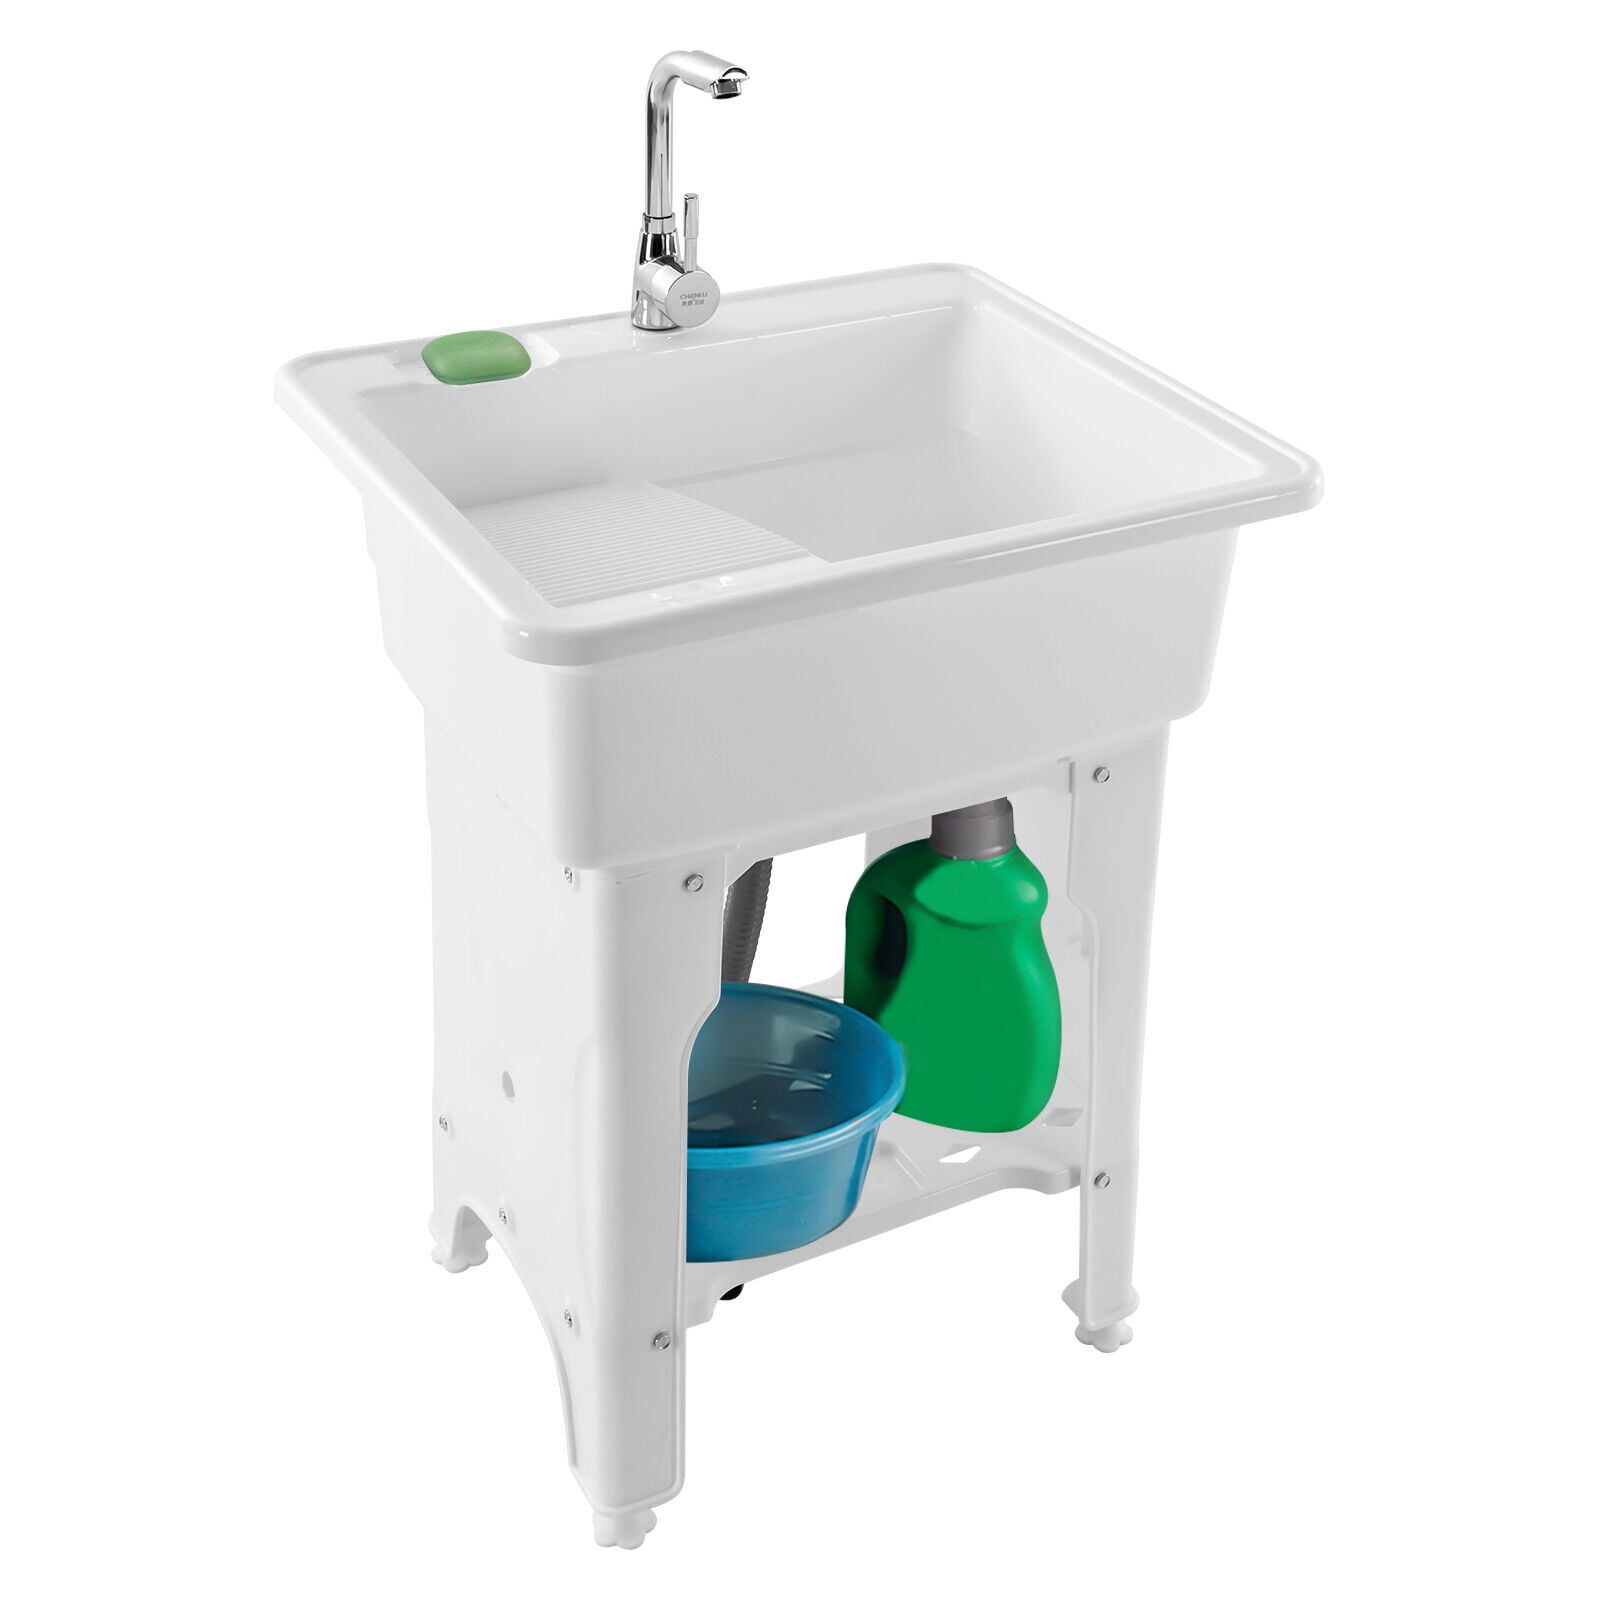 Freestanding Plastic Laundry Sink with Washboard, W31 x D22 x H31.5  Indoor and Outdoor Utility Sink with Cold and Hot Water Faucet, Hoses and  Drain Kit for Laundry Room, Garage, Basement, Garden 